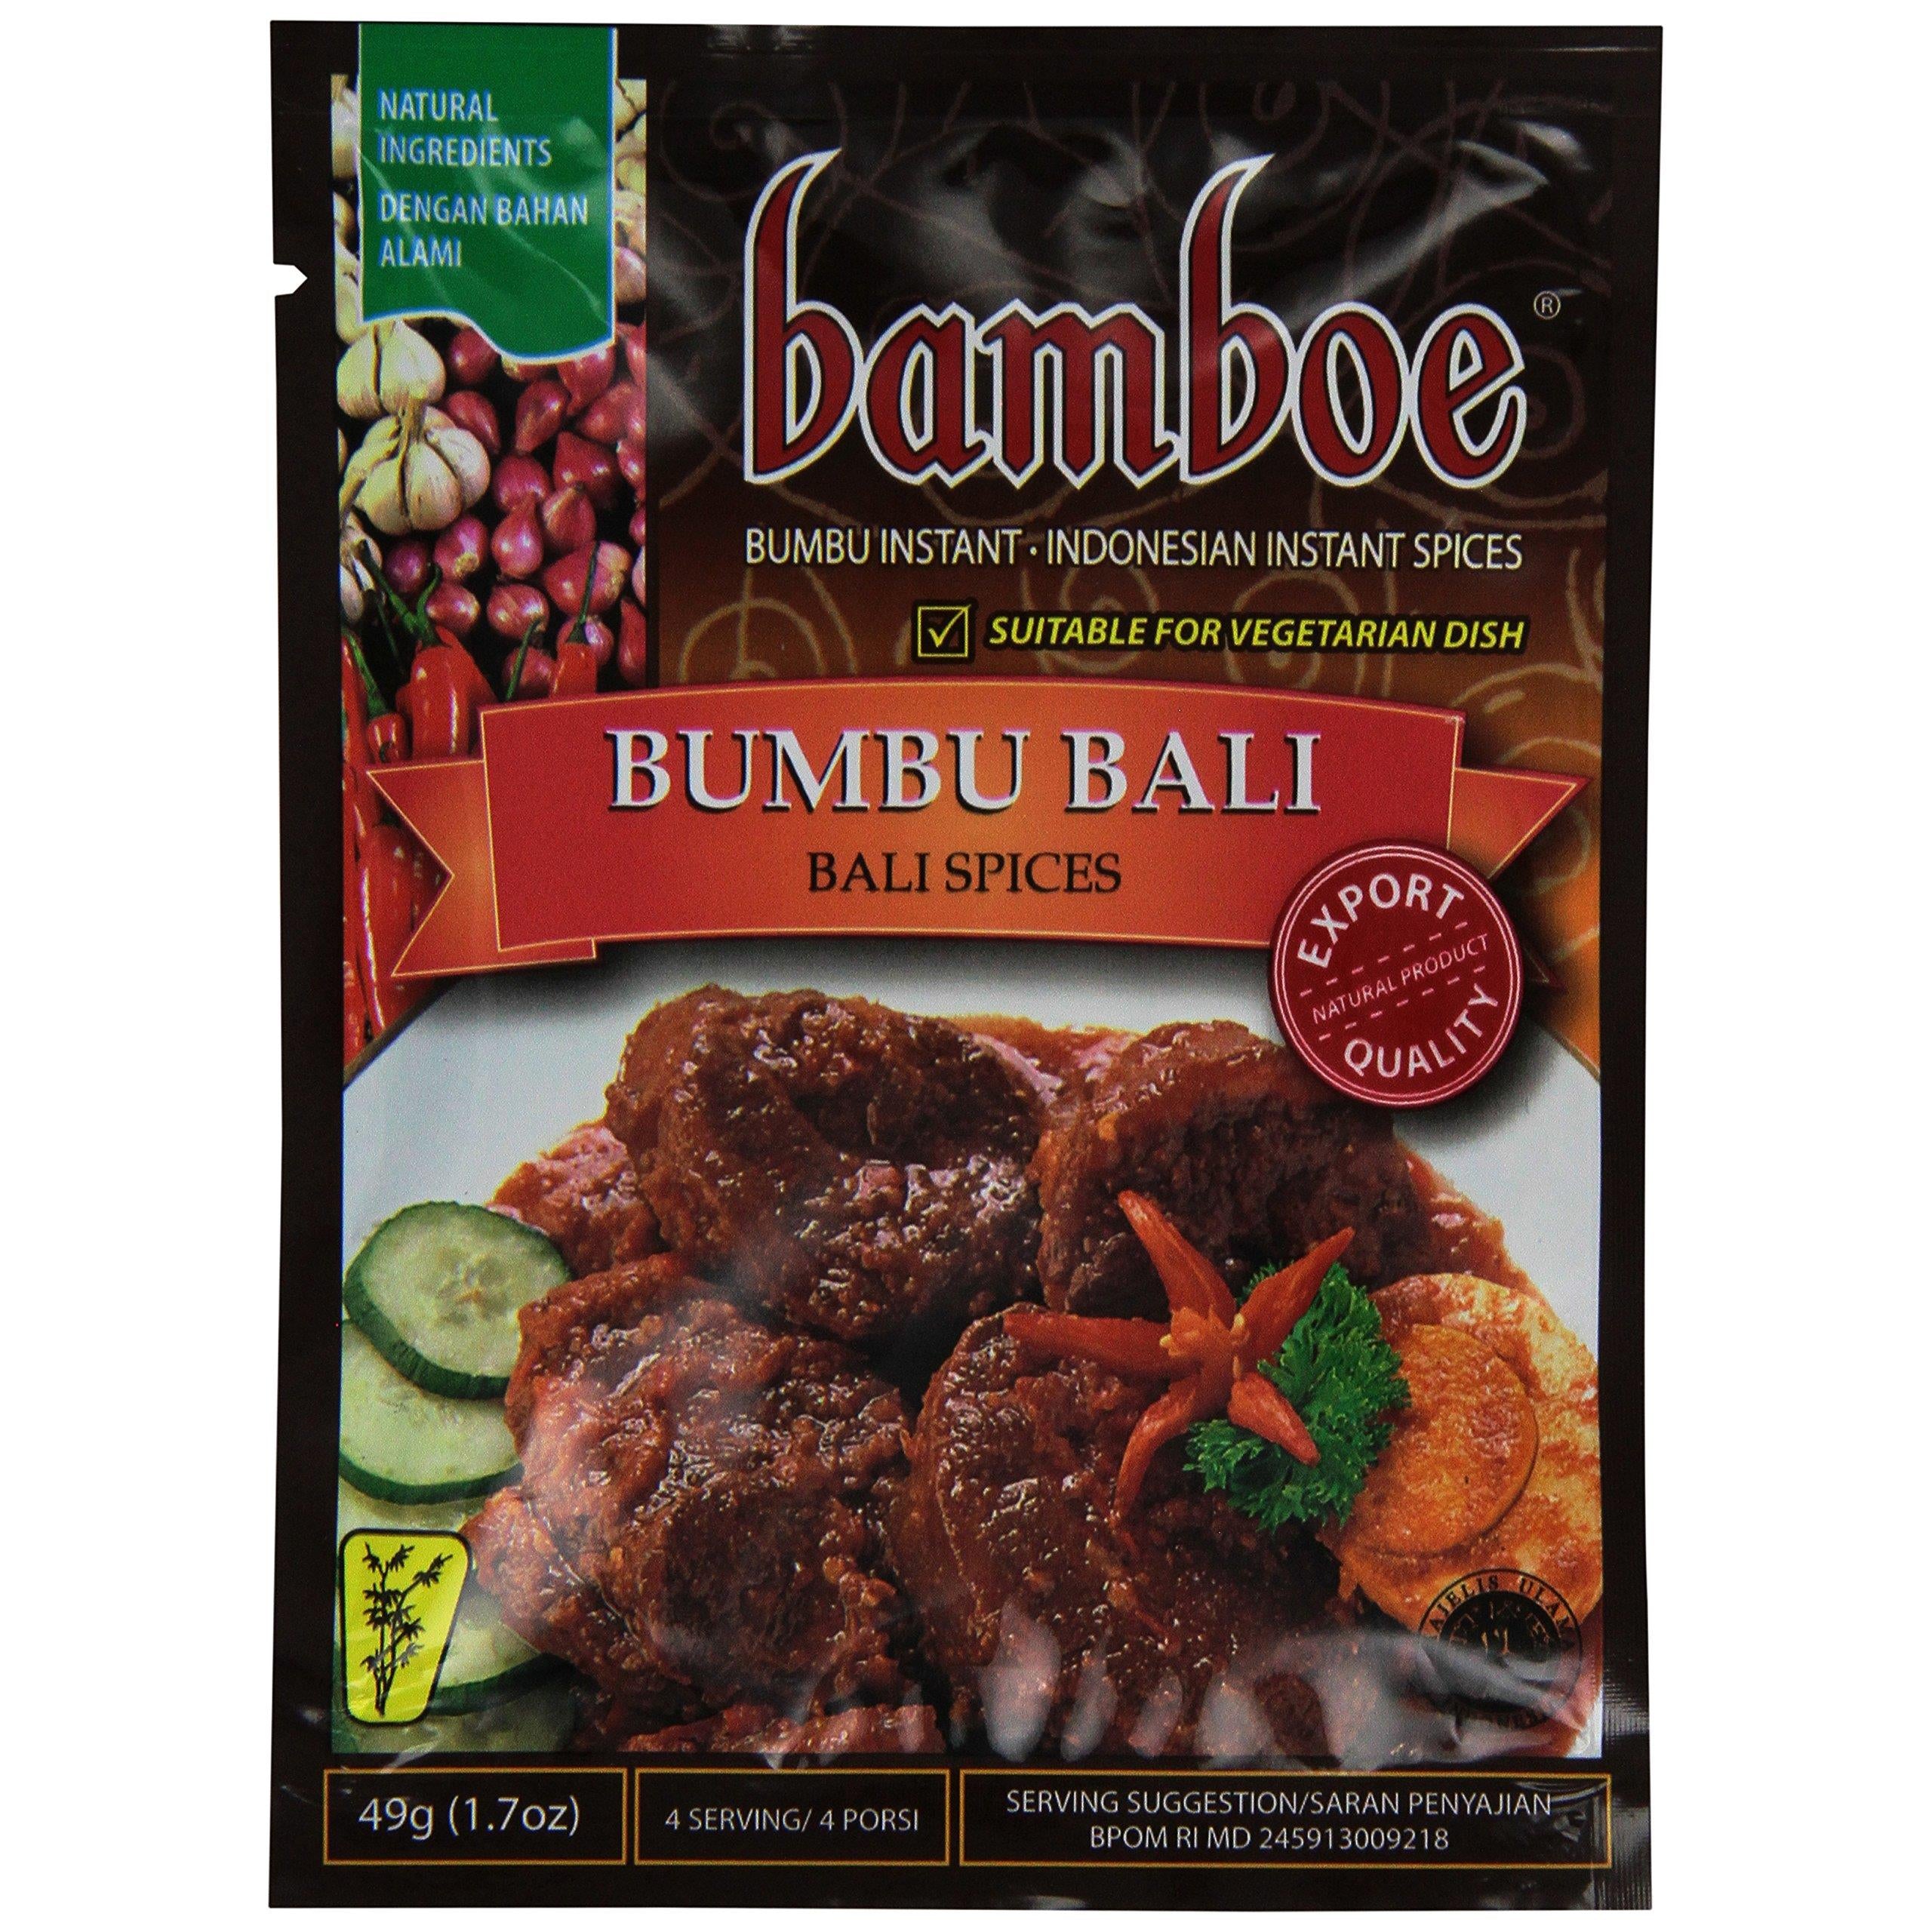 Bamboe Bumbu Bali Spices, Indonesia InstantSpices 1.7-Ounce (Pack of 12)